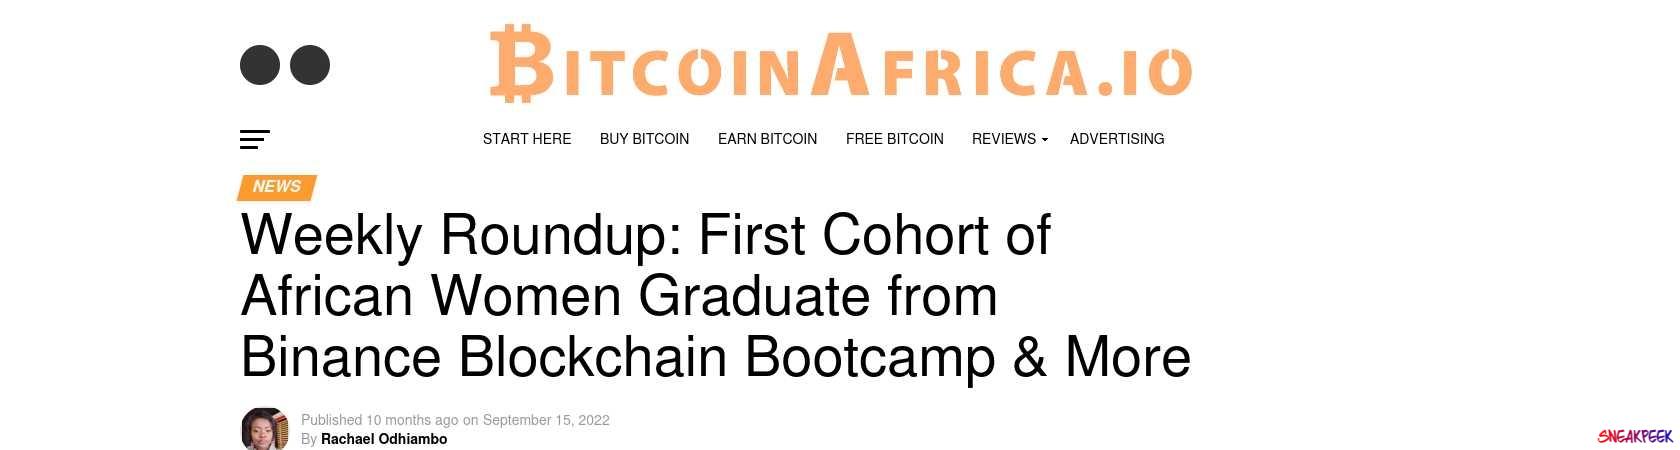 Read the full Article:  ⭲ Weekly Roundup: First Cohort of African Women Graduate from Binance Blockchain Bootcamp & More